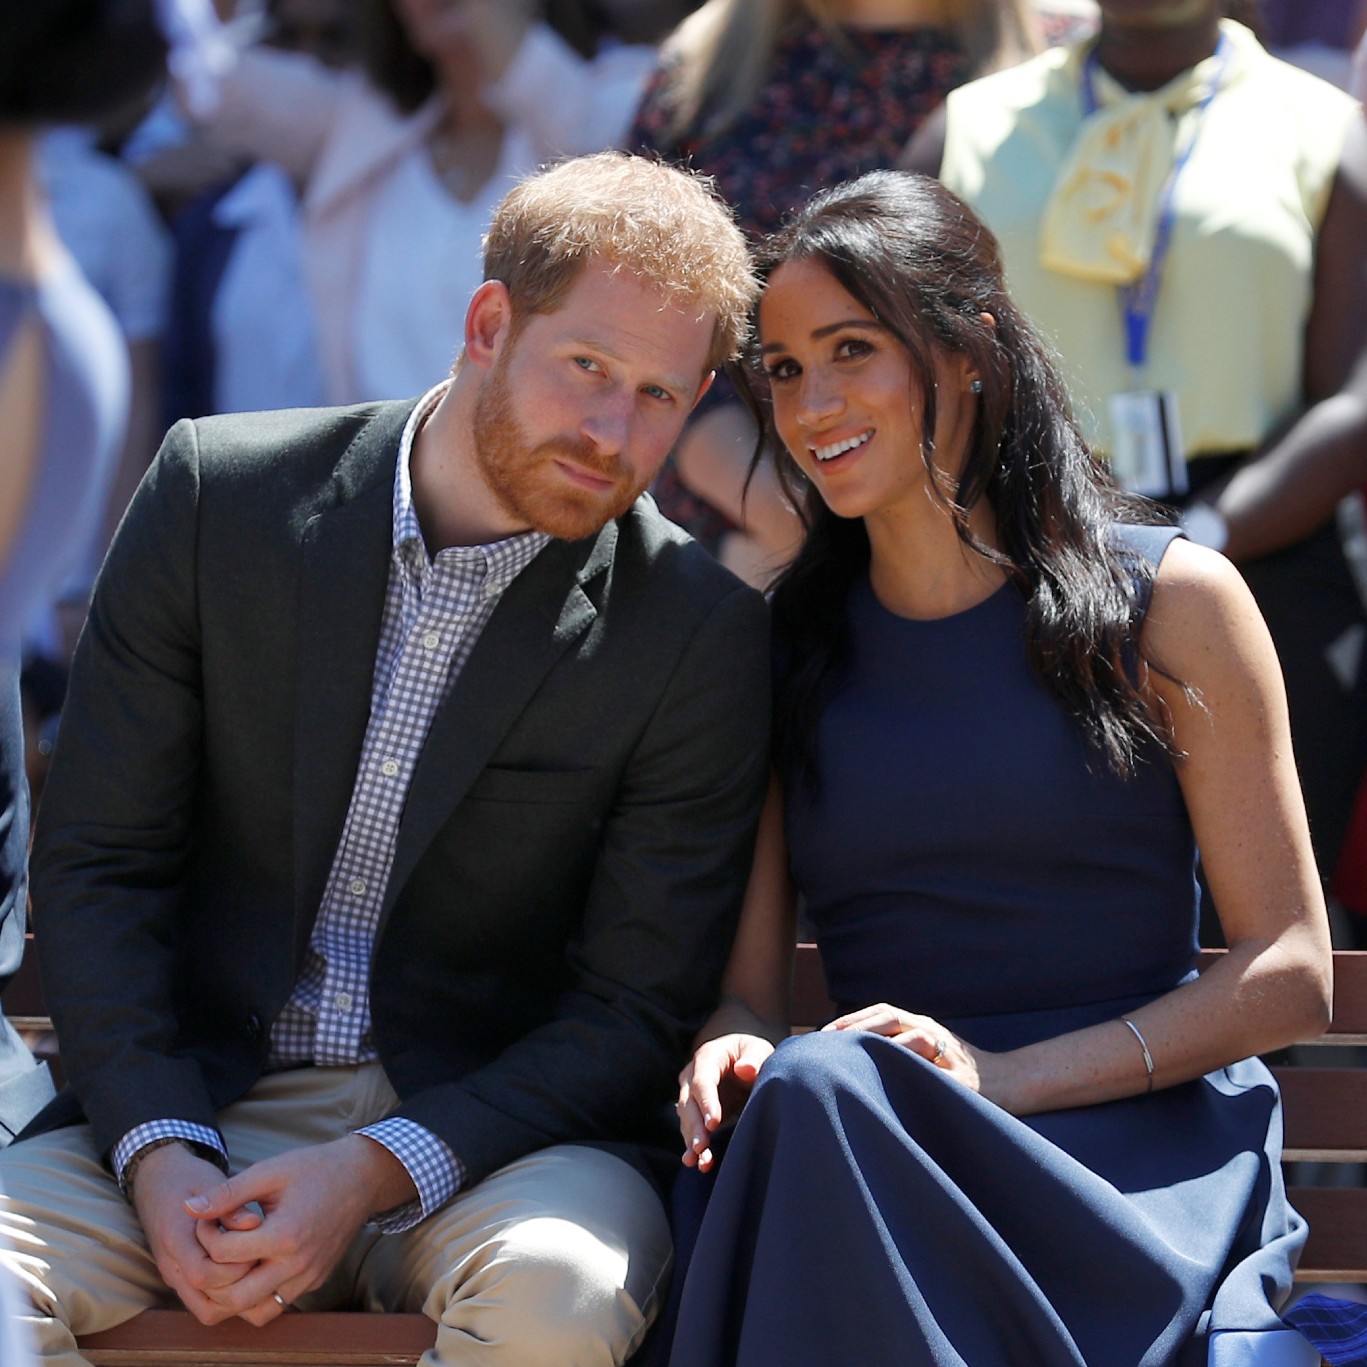  Harry 'truly believes Meghan is similar to Princess Diana', body language expert says 